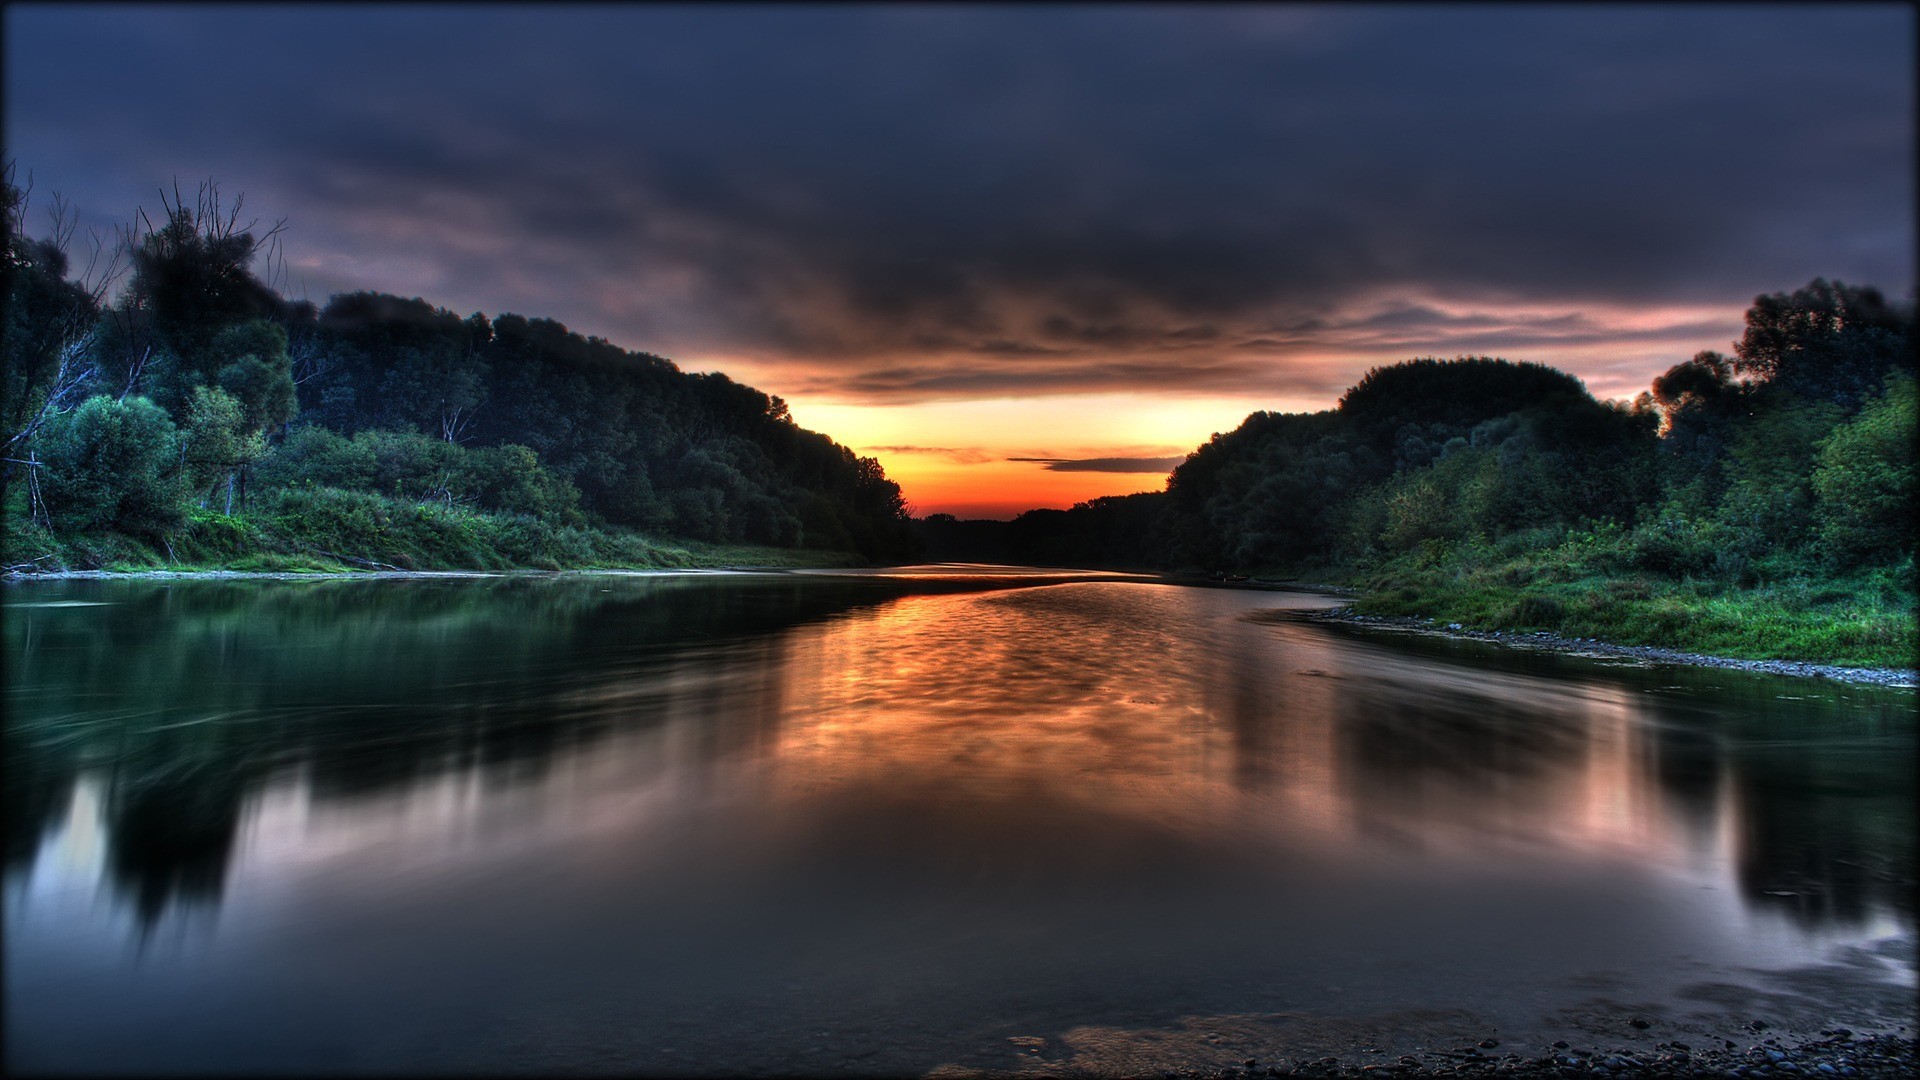 1920x1080  HD Wallpapers Widescreen 1080P 3D | donau sunrise 1080p hdtv  Wallpapers in HD and Widescreen Resolutions